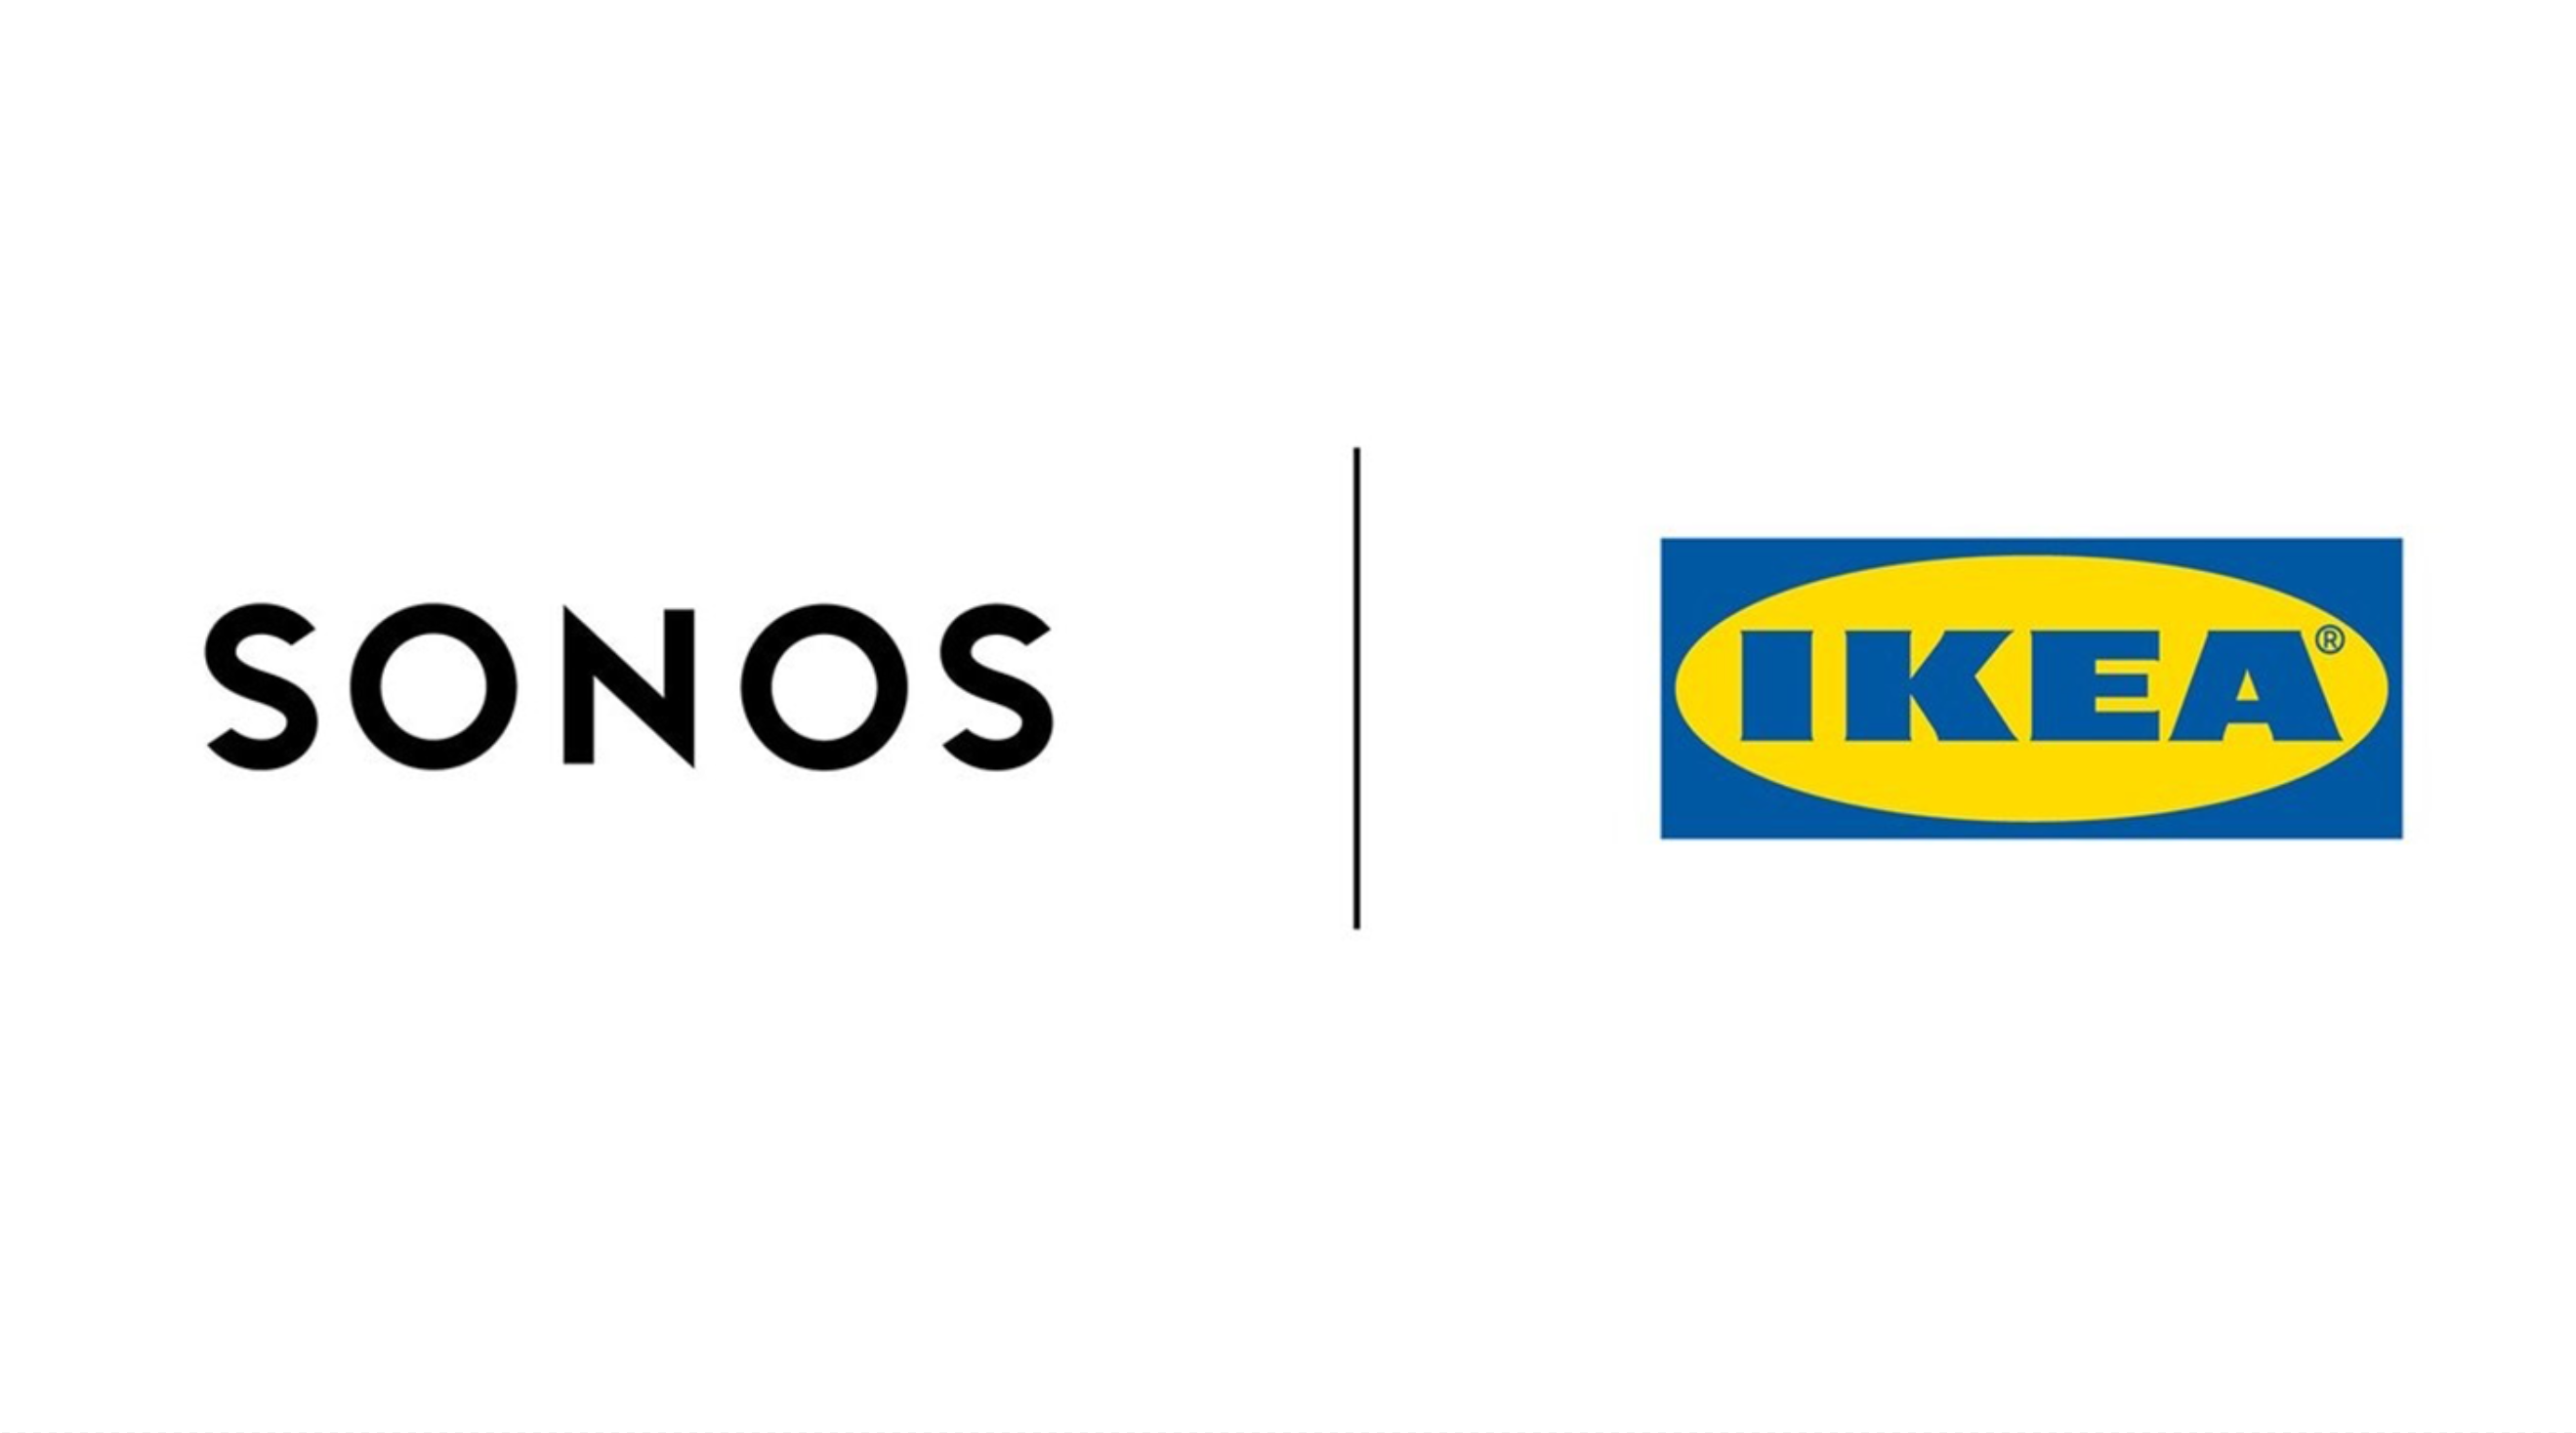 Sonos and Ikea